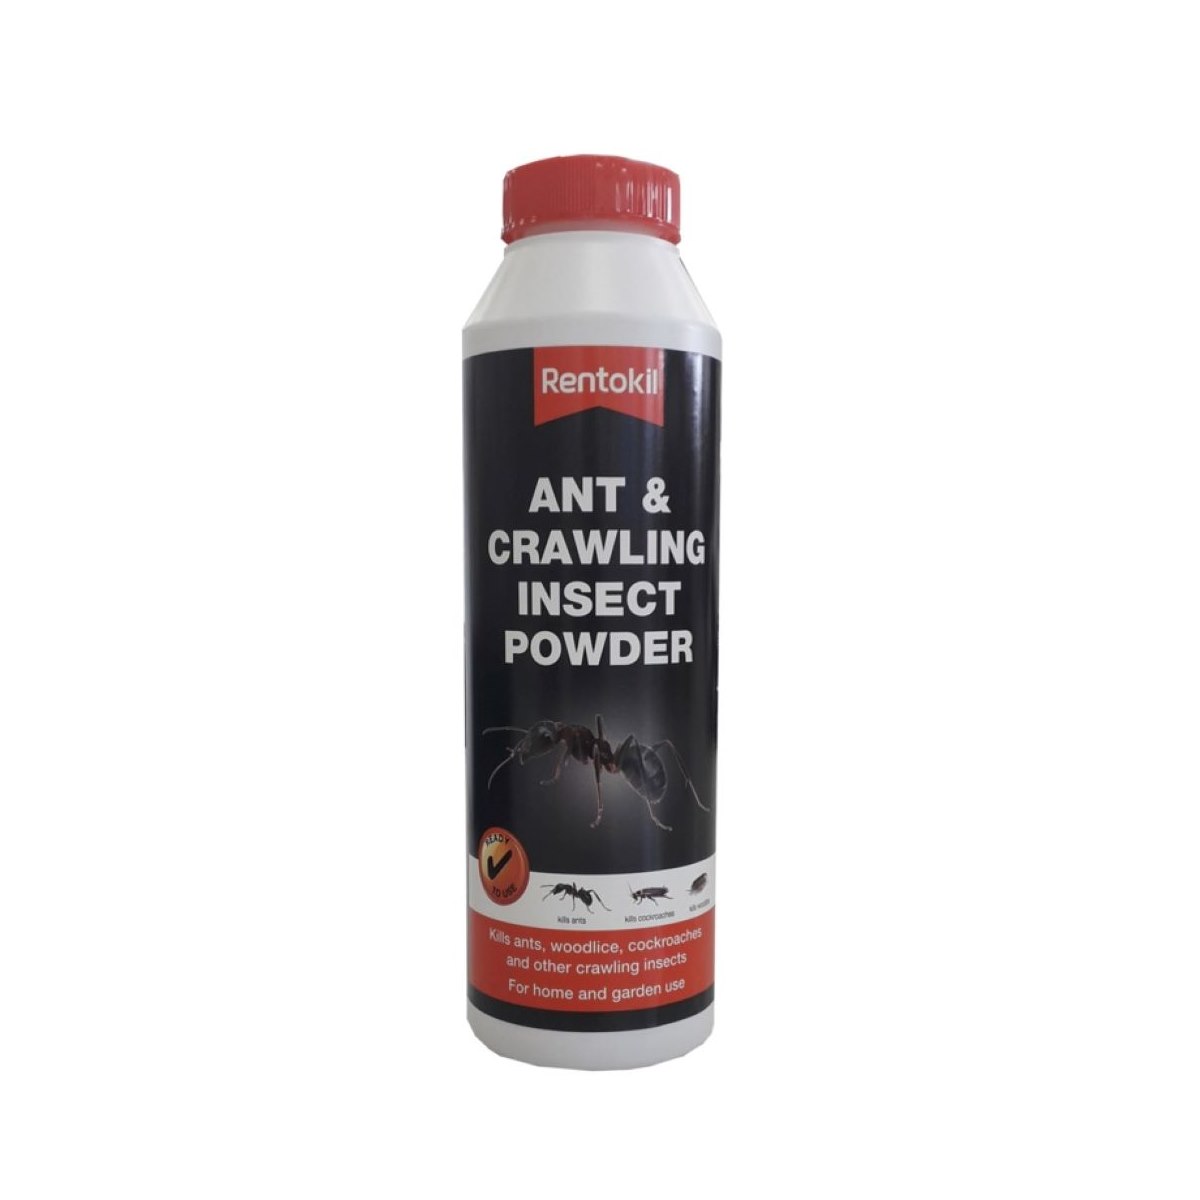 Rentokil Ant and Crawling Insect Powder 300g